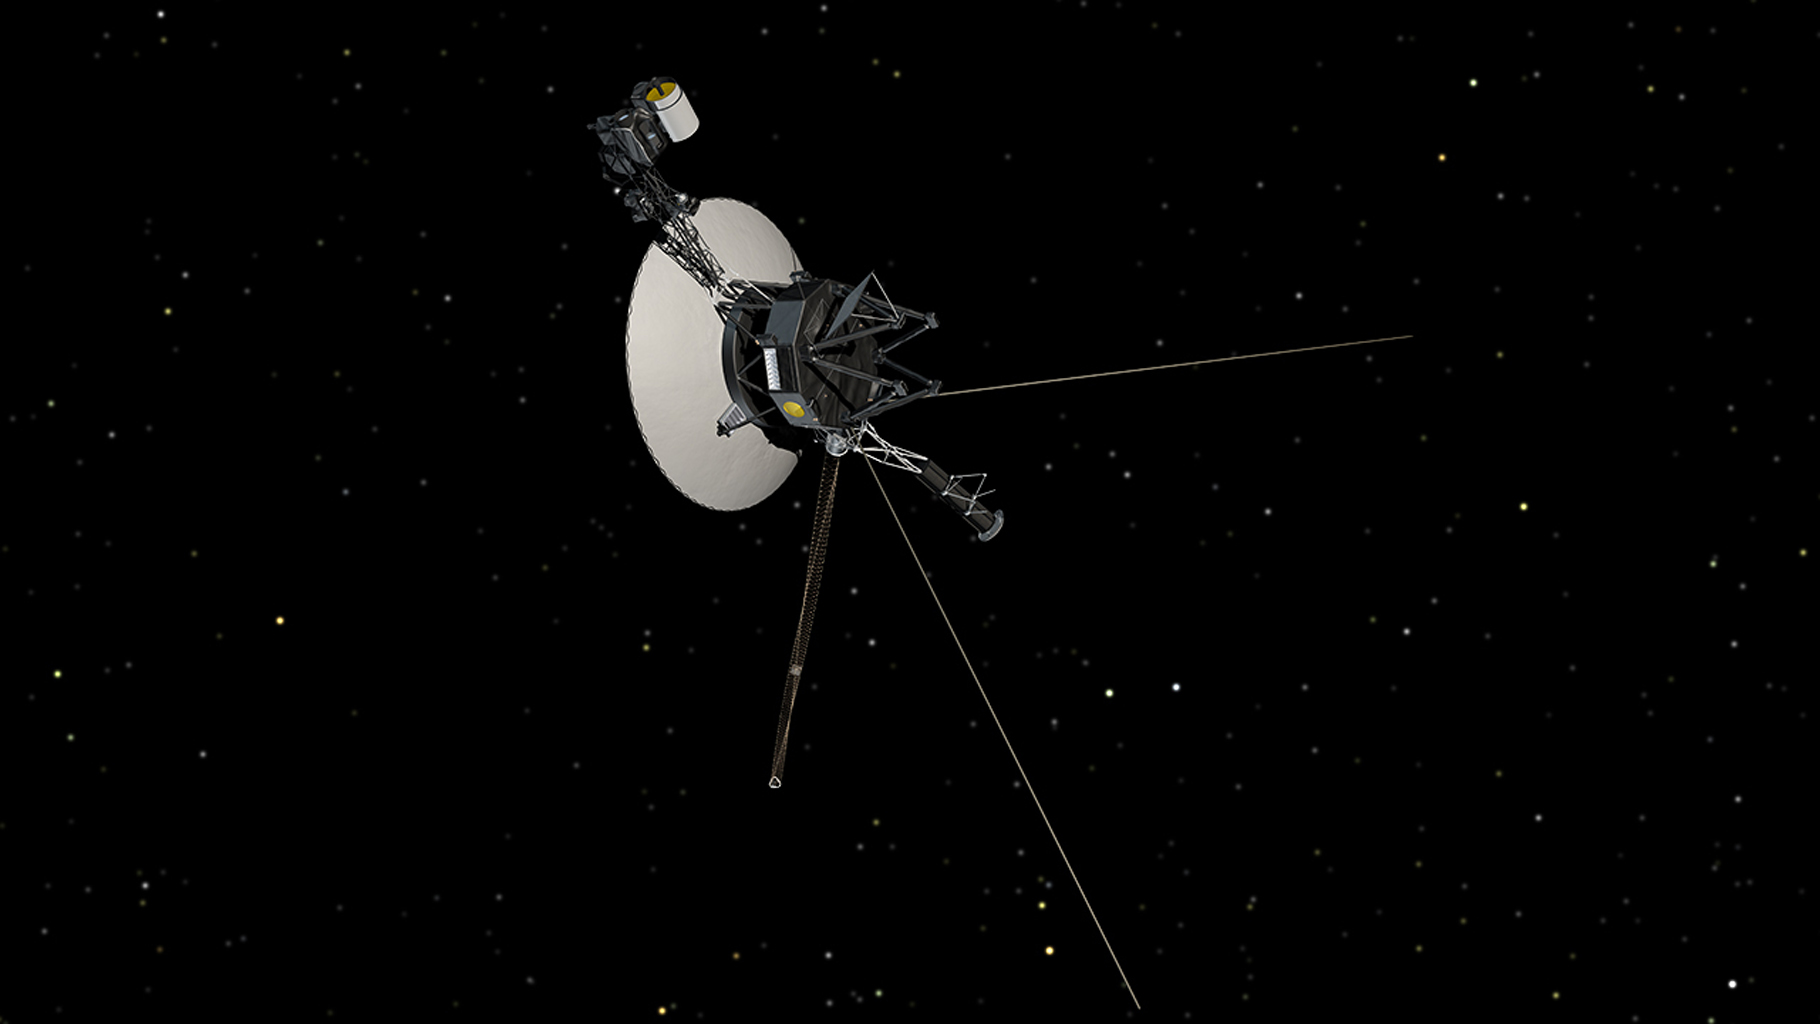 This artist’s concept shows NASA’s Voyager spacecraft against a backdrop of stars.